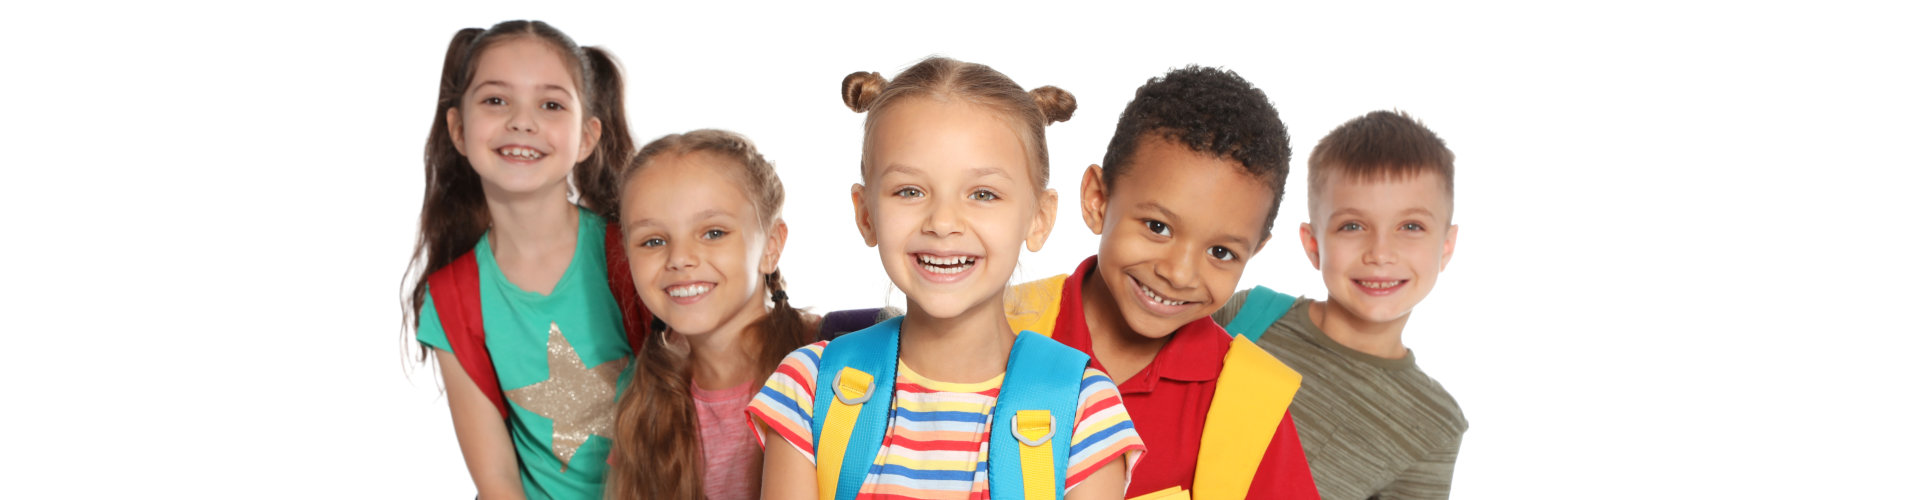 Group of little children with backpacks and school supplies on white background